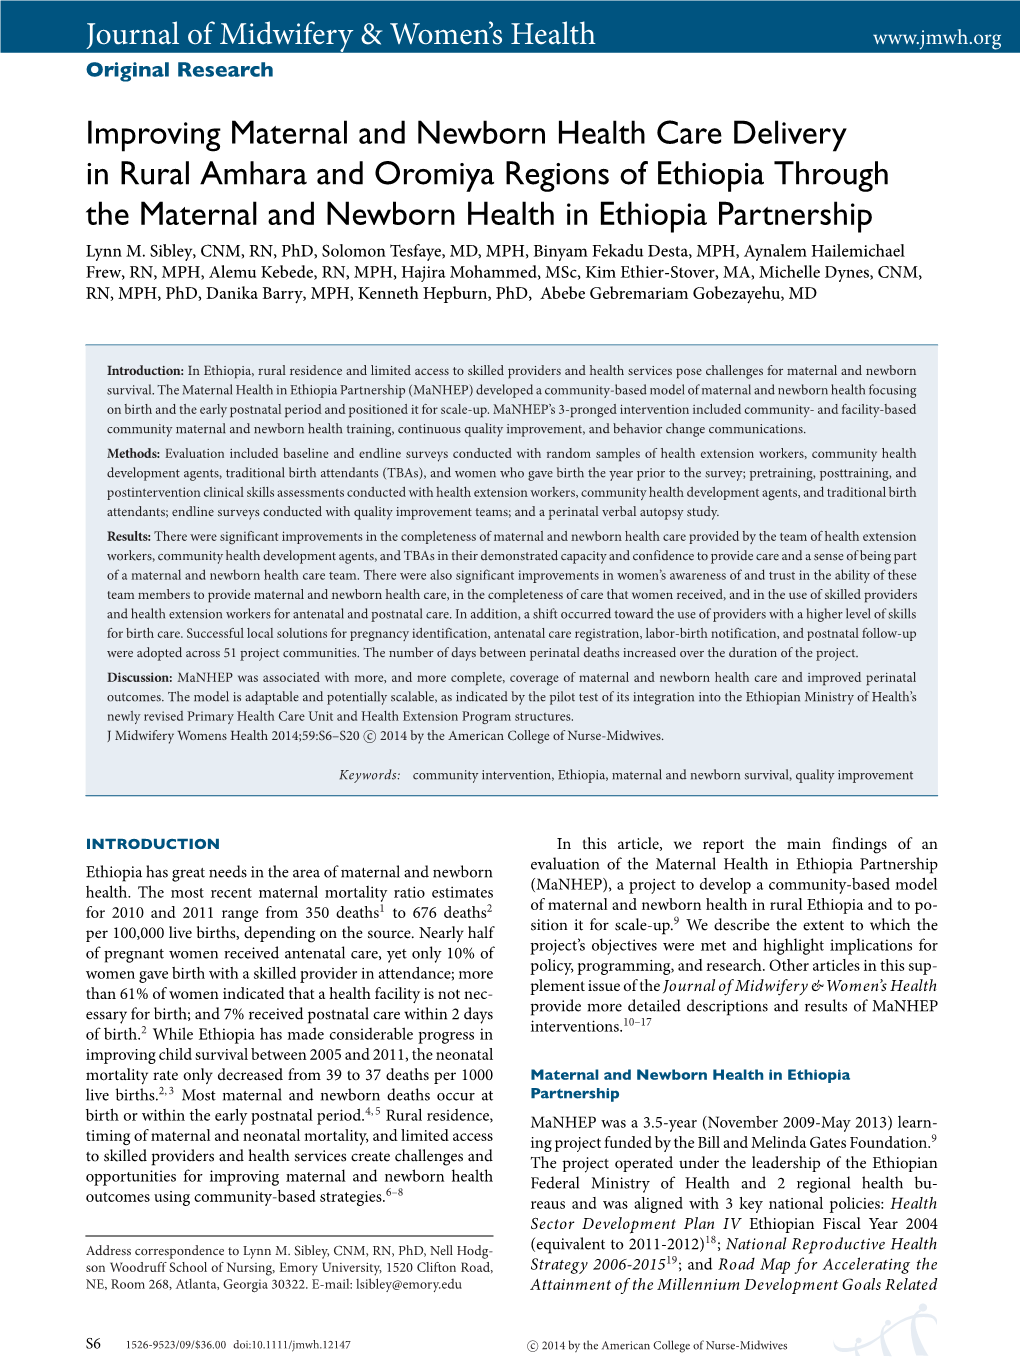 Improving Maternal and Newborn Health Care Delivery in Rural